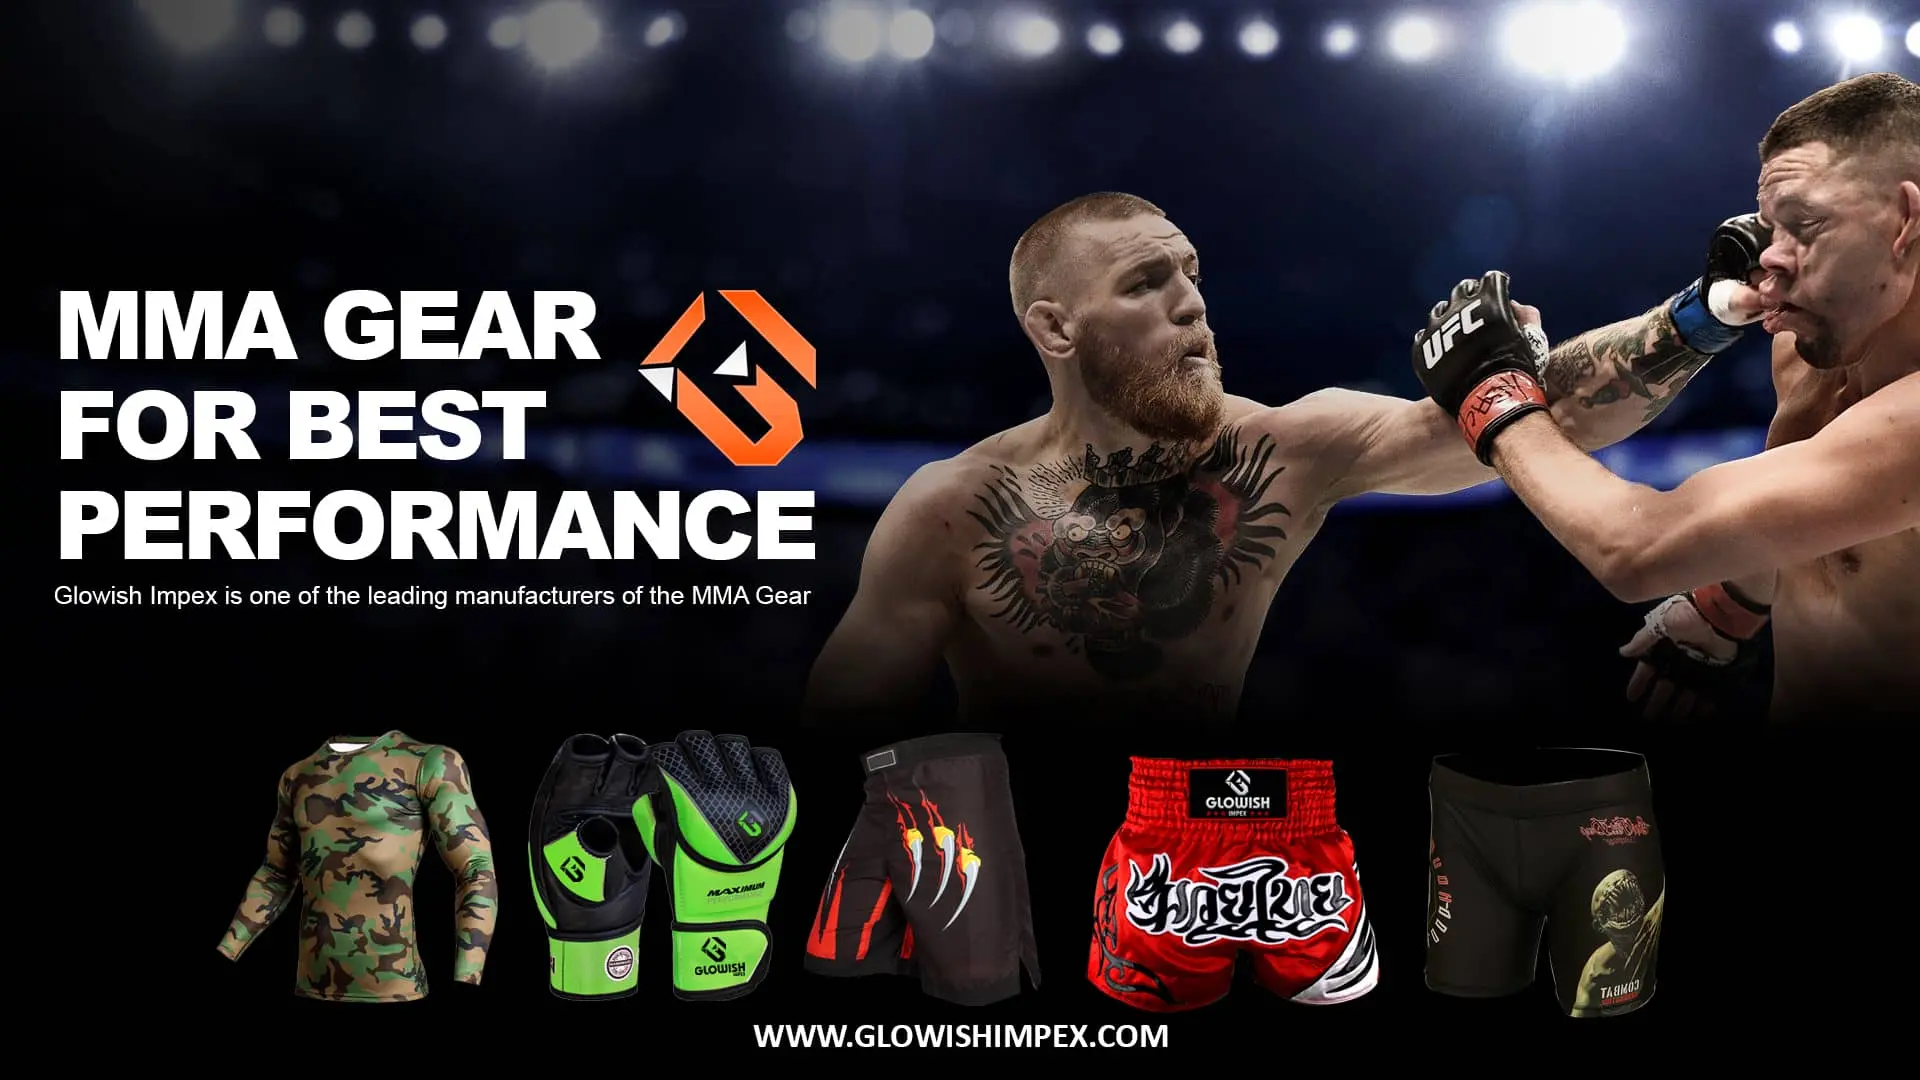 MMA Gear for Best Performance